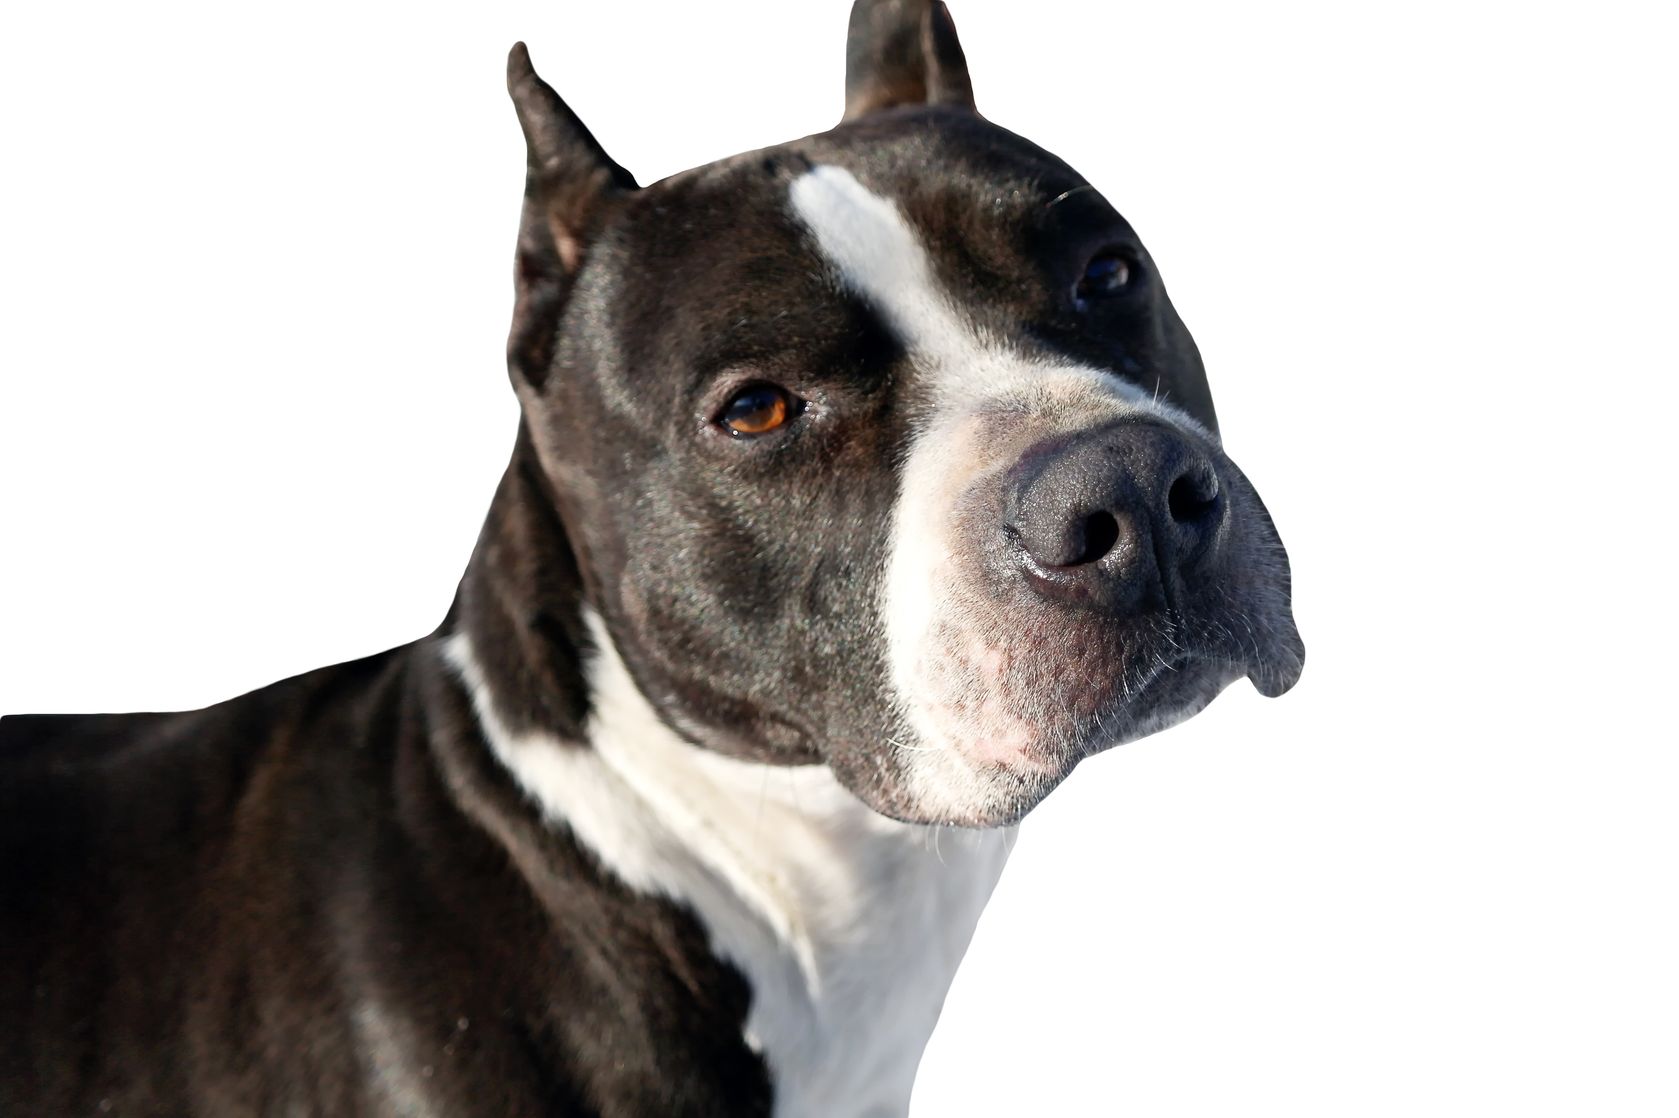 Pit bulls like this one are at the center of a debate over whether the breed should be regulated or even banned in Michigan communities (courtesy photo).